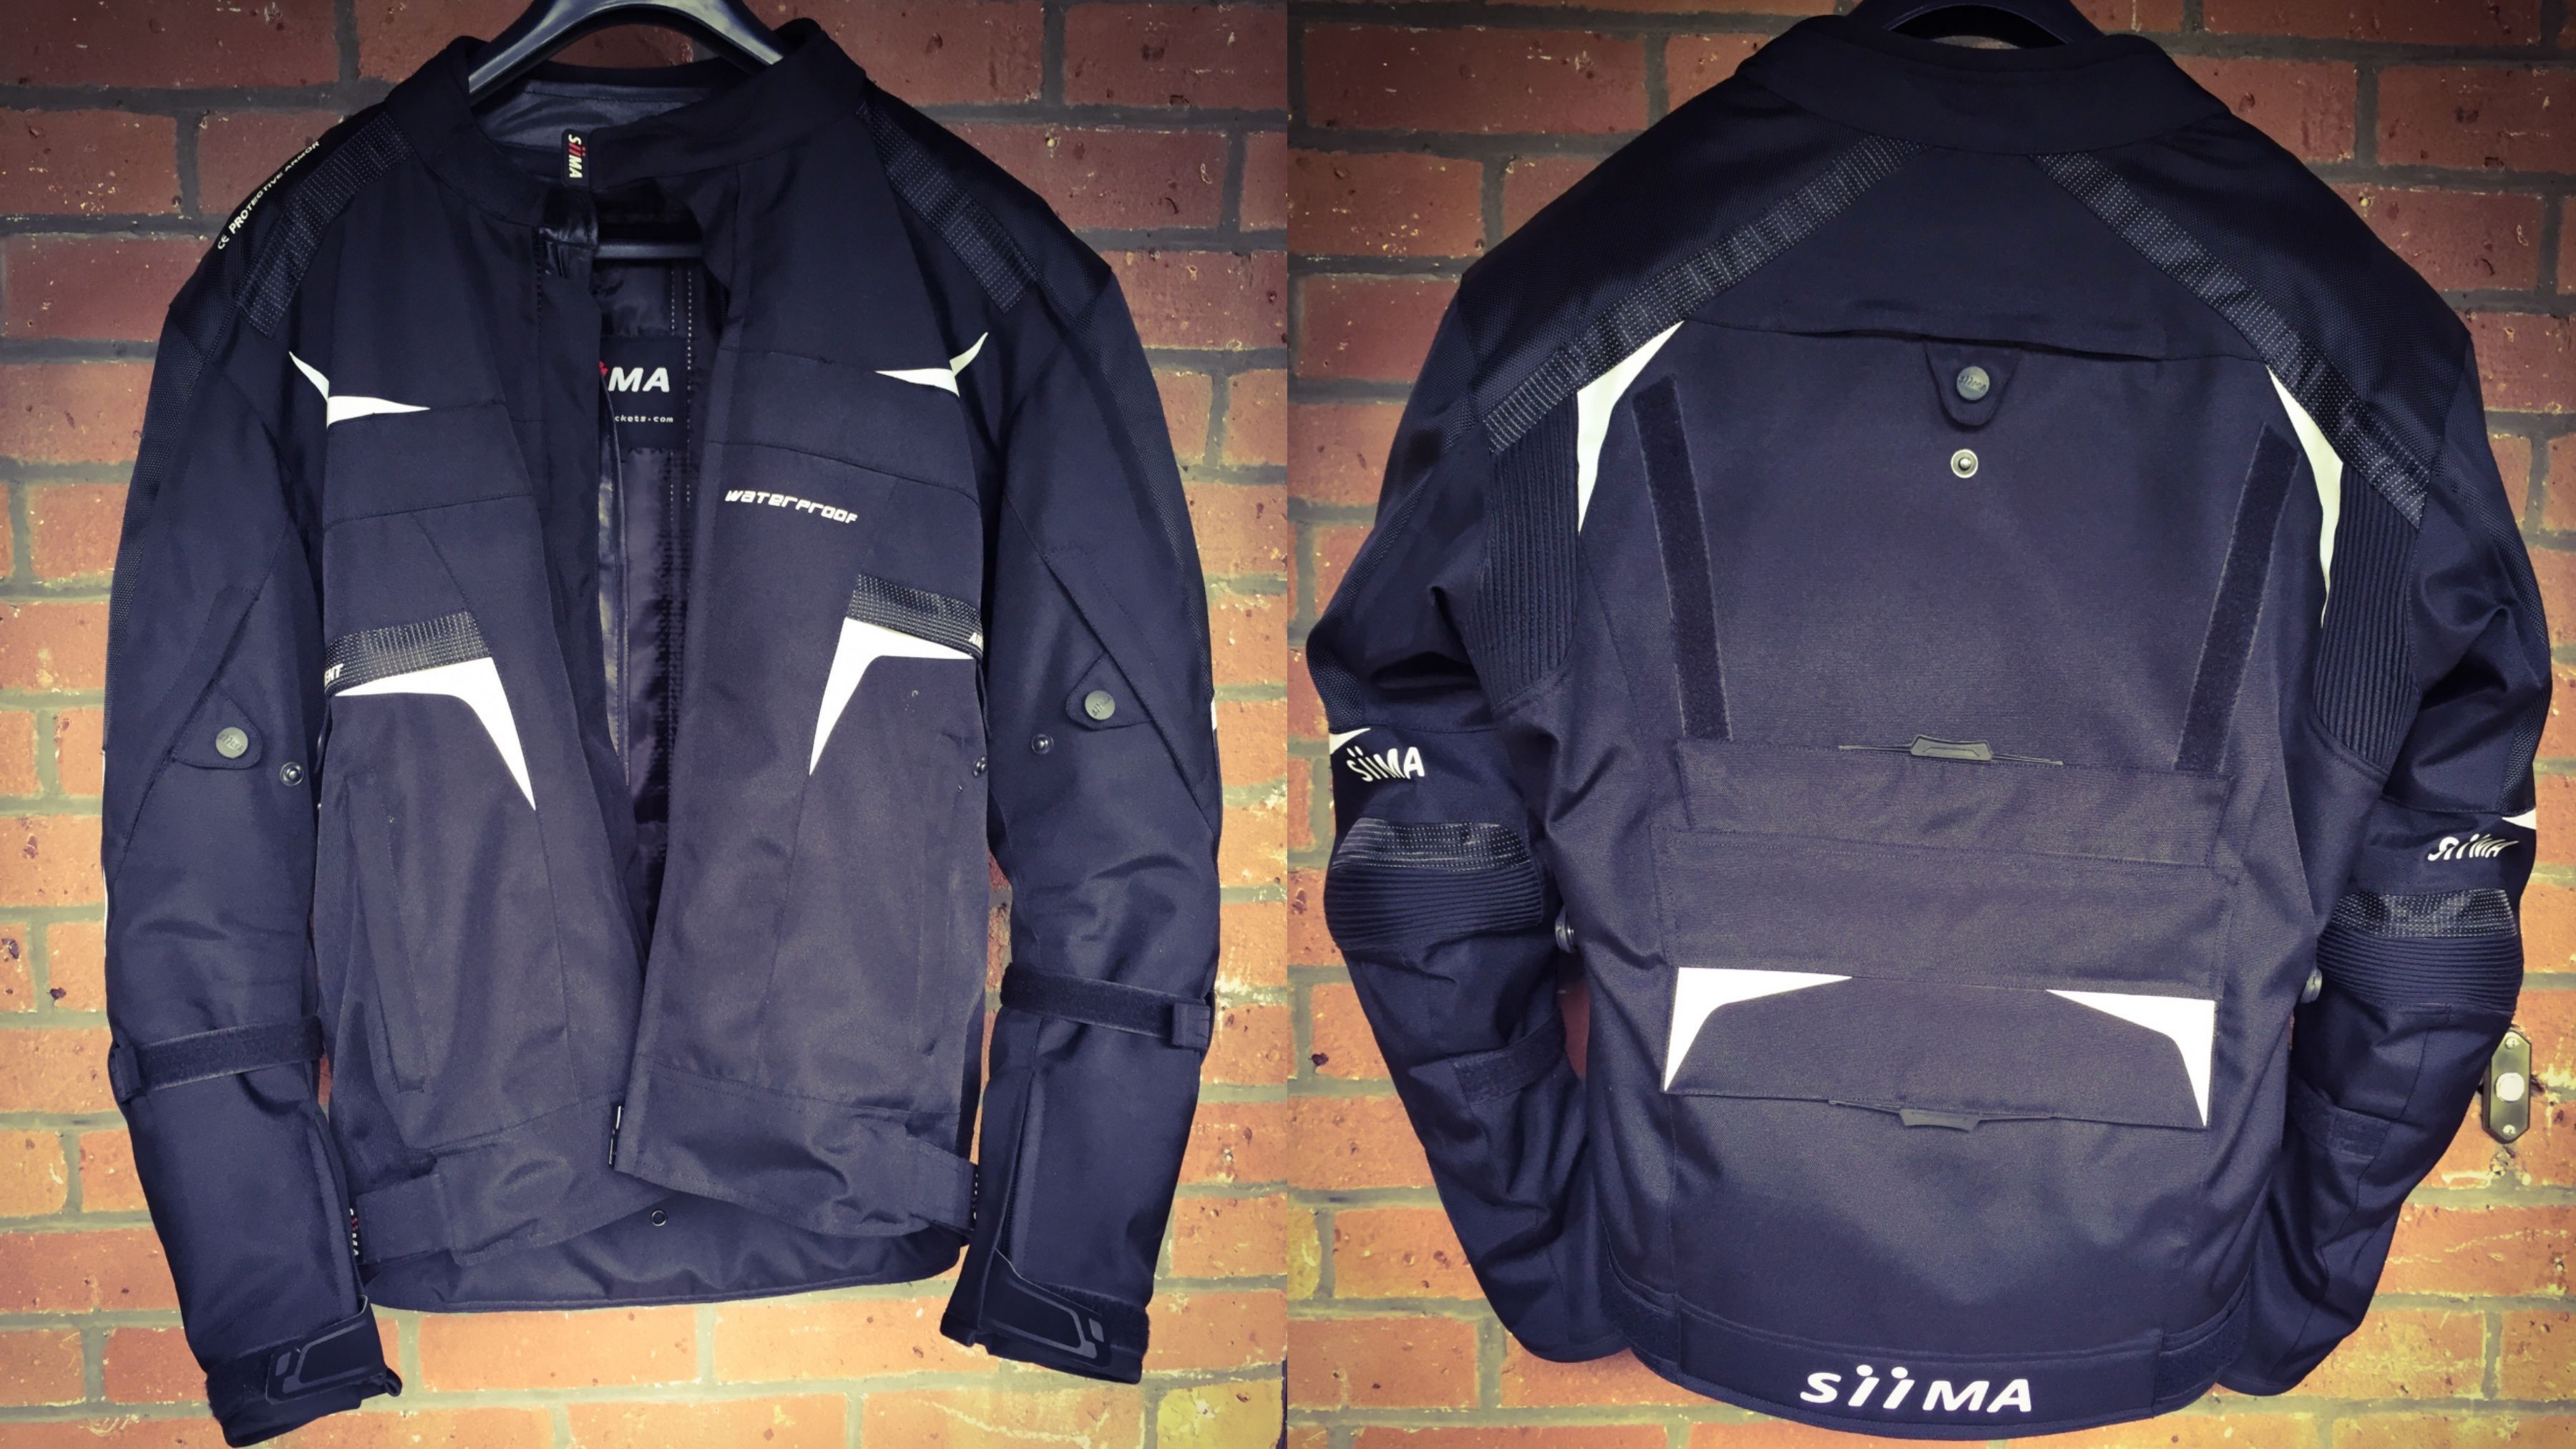 Siima SV3 Leo Jacket - Front and Back views